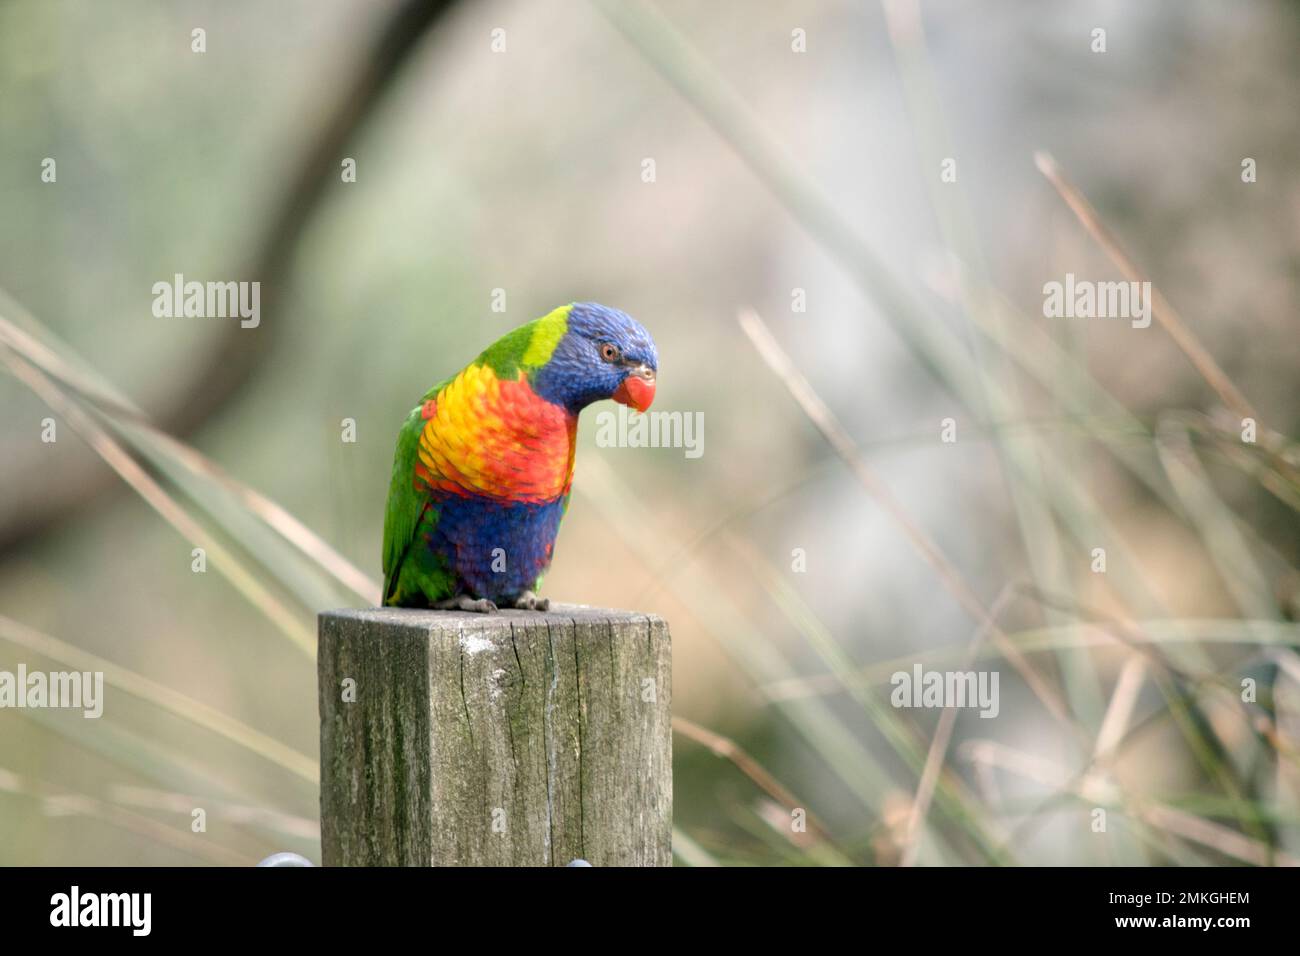 the rainbow lorikeet is a colorful bird, it has a blue head, orange and yellow chest and green wings Stock Photo